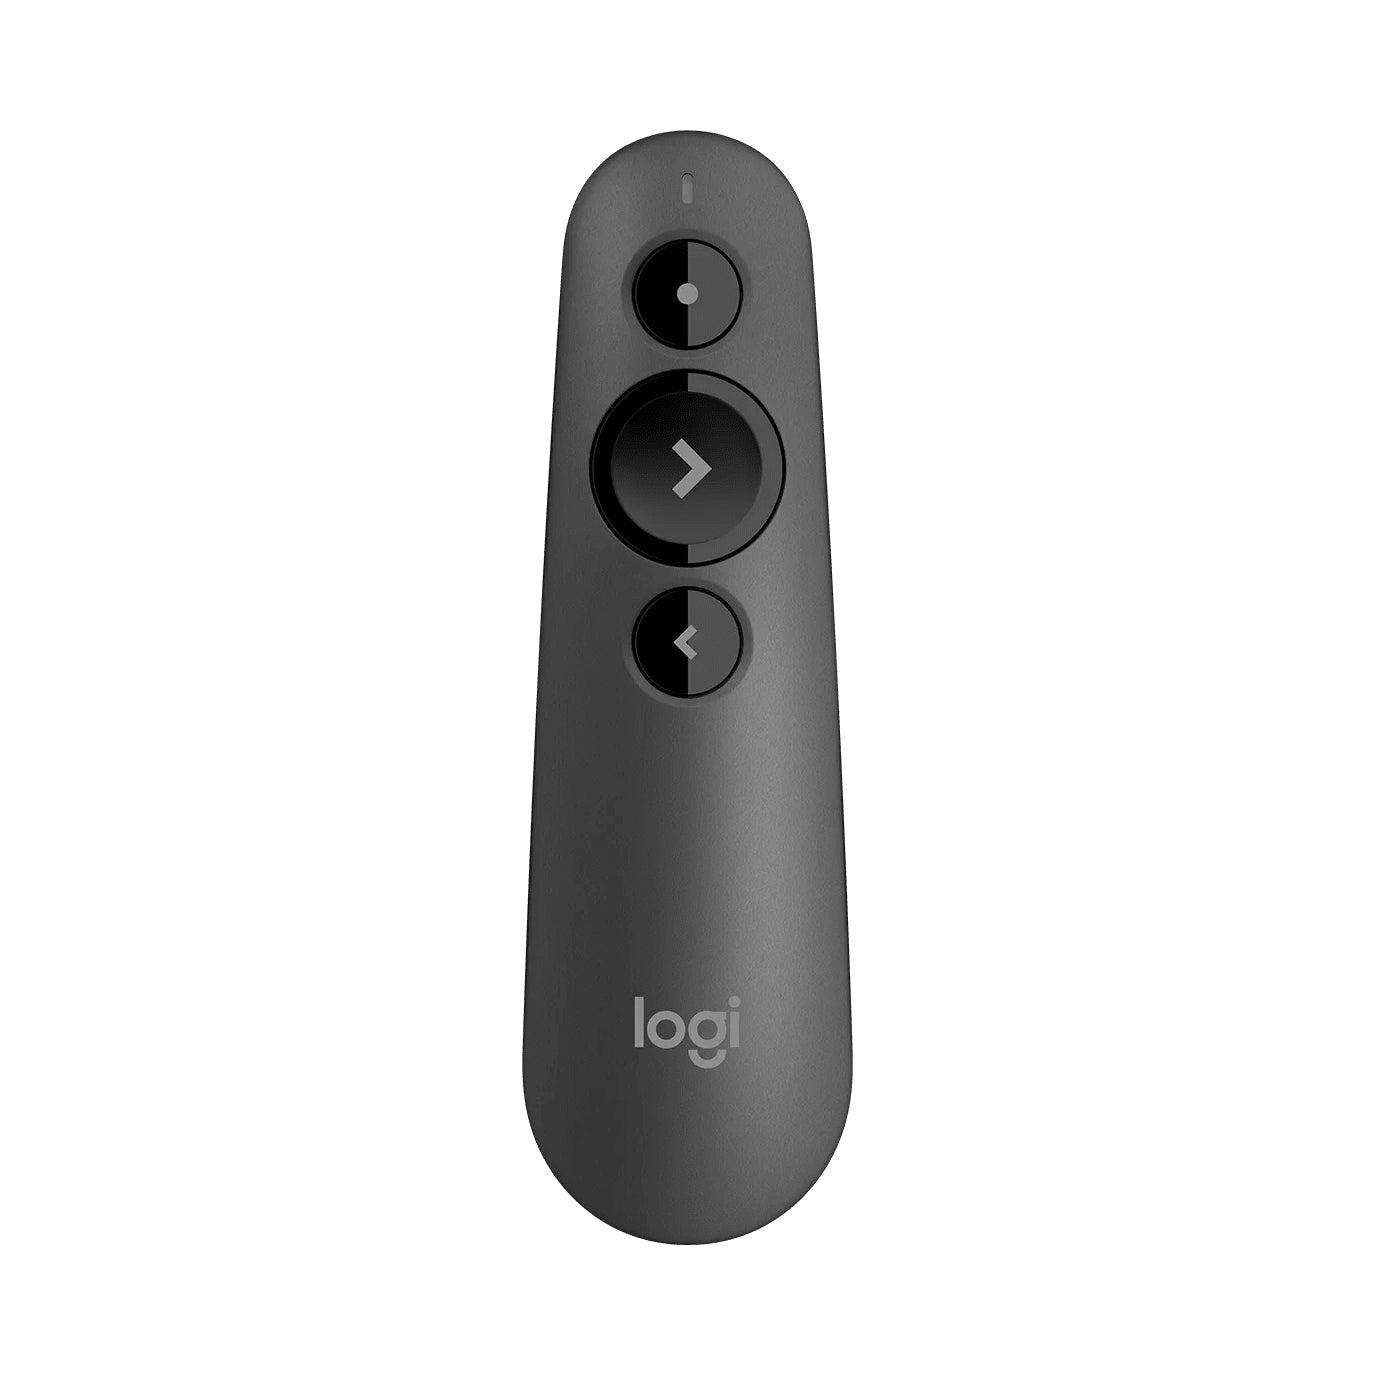 Logitech R500s Wireless Bluetooth Presentation Remote with Built in Red Laser Pointer and 20m Max Transmission Range for PC and Laptop Computers (Graphite)